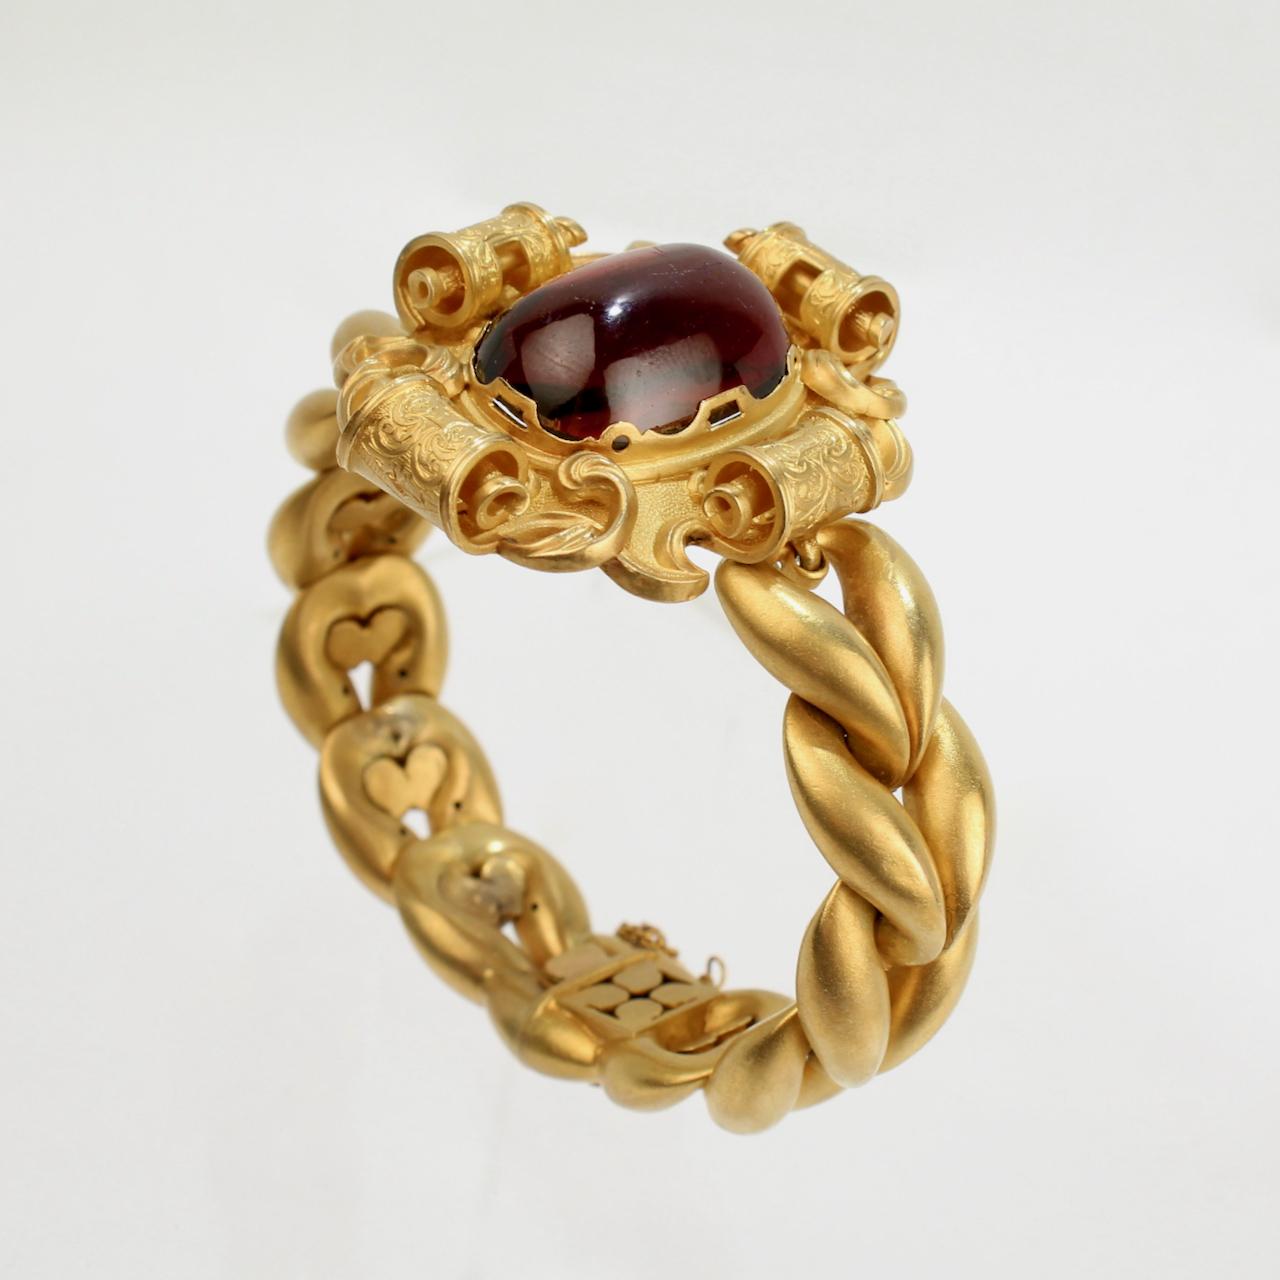 A very fine antique Victorian era 18K gold and garnet bracelet.

With a decorative scroll frame centered by a prong set oval garnet cabochon in 18k gold.  

Braided gold bands wrap around the wrist with a box clasp closure and a safety chain.  

The